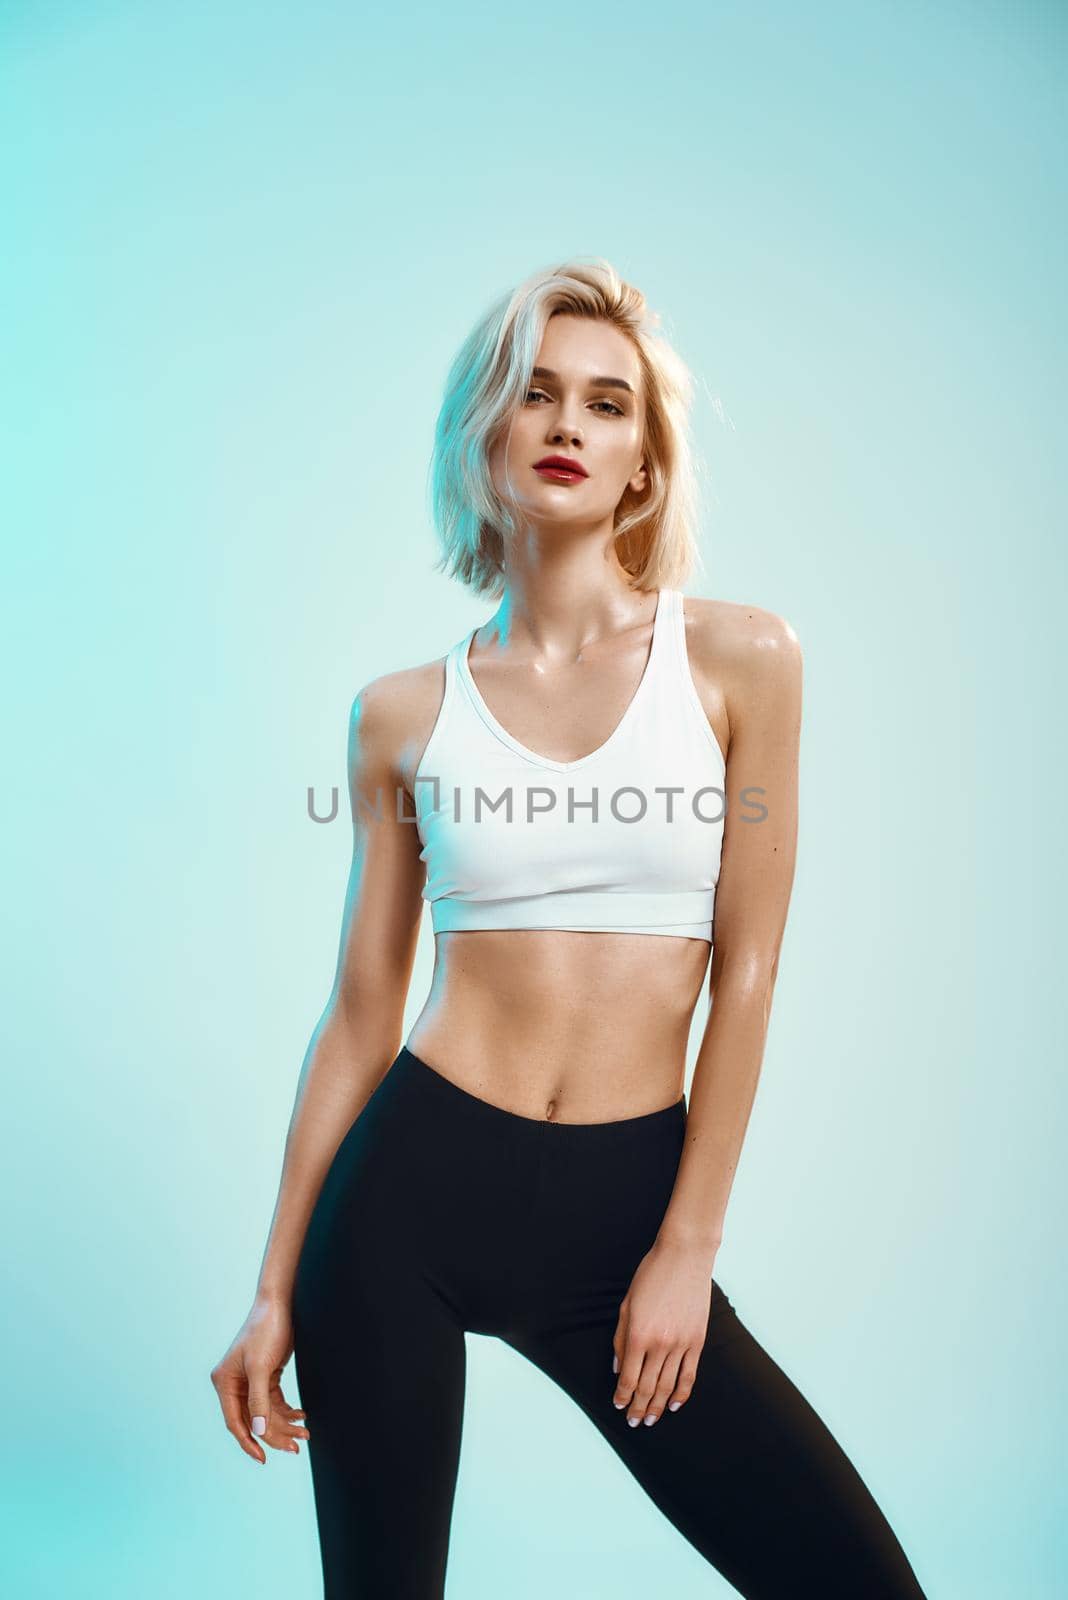 Beauty portrait. Sexy young woman in white top and black leggings looking at camera while standing against blue background in studio by friendsstock